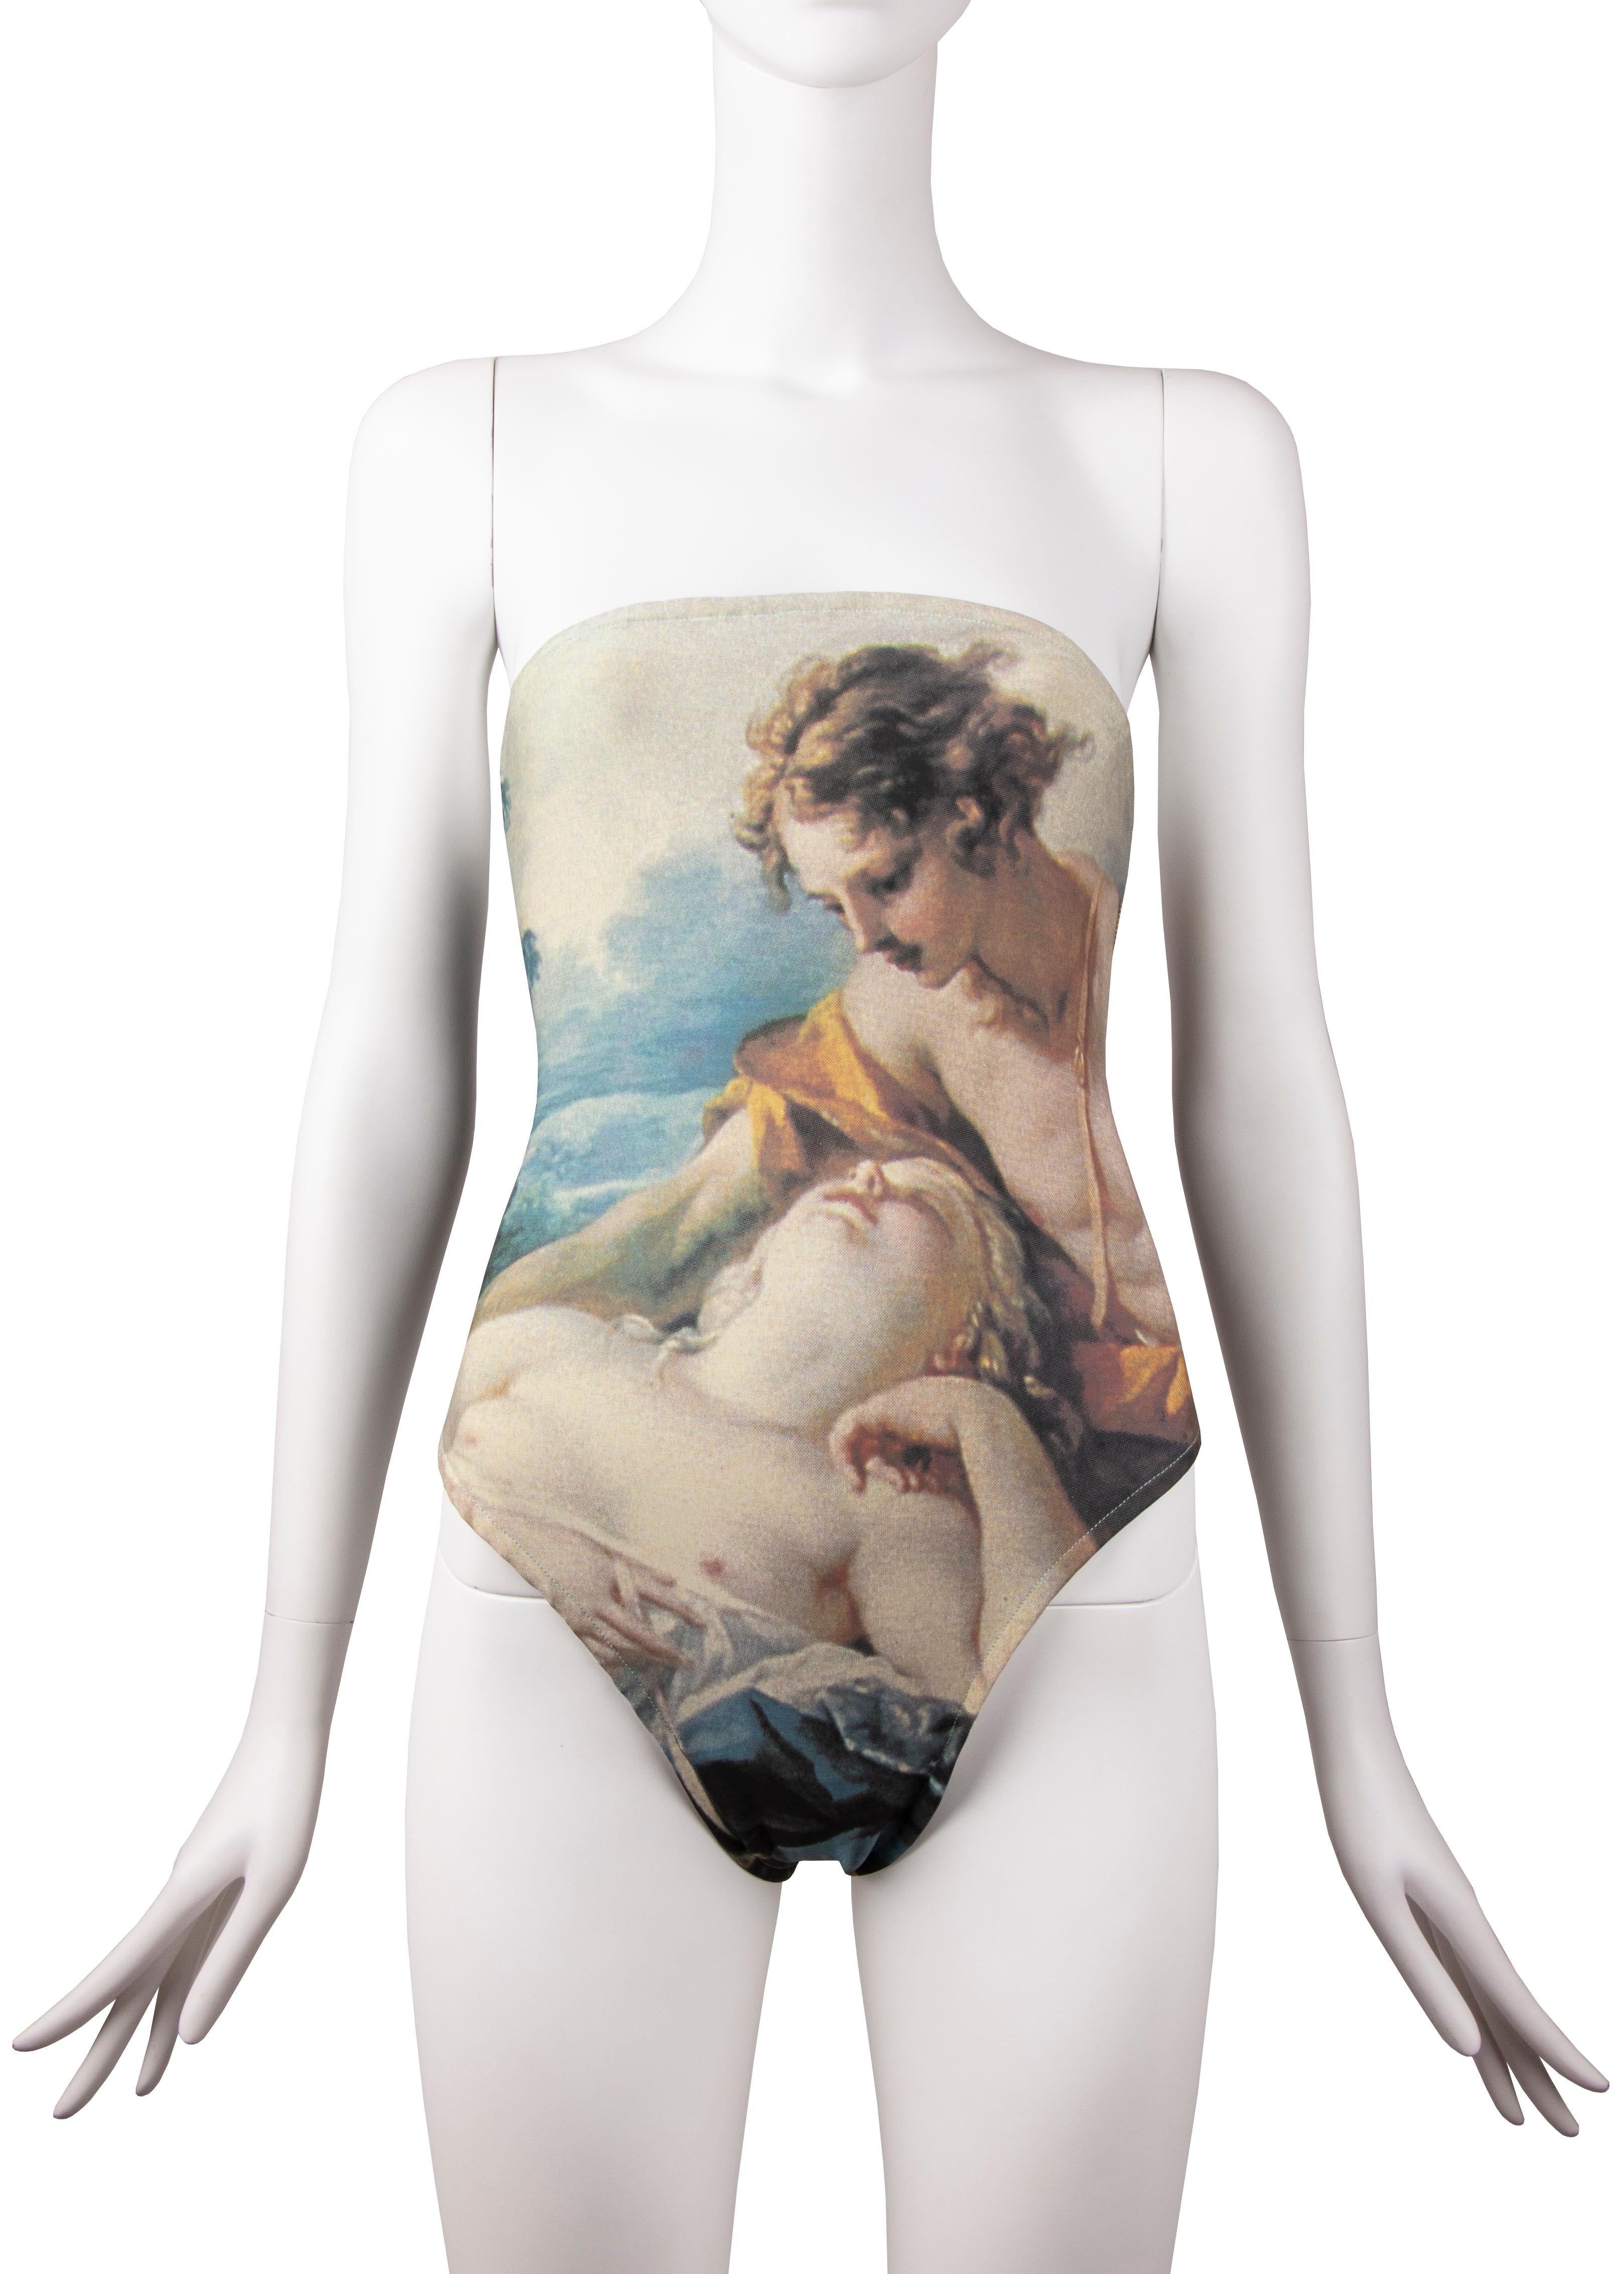 A Vivienne Westwood “Cut, Slash and Pull” leotard, Spring-Summer 1991, Look 22. This piece features the painting “Daphnis and Chloe” by Francois Boucher (c. 1743) across the entire garment. This iconic painting has become synonymous with Vivienne